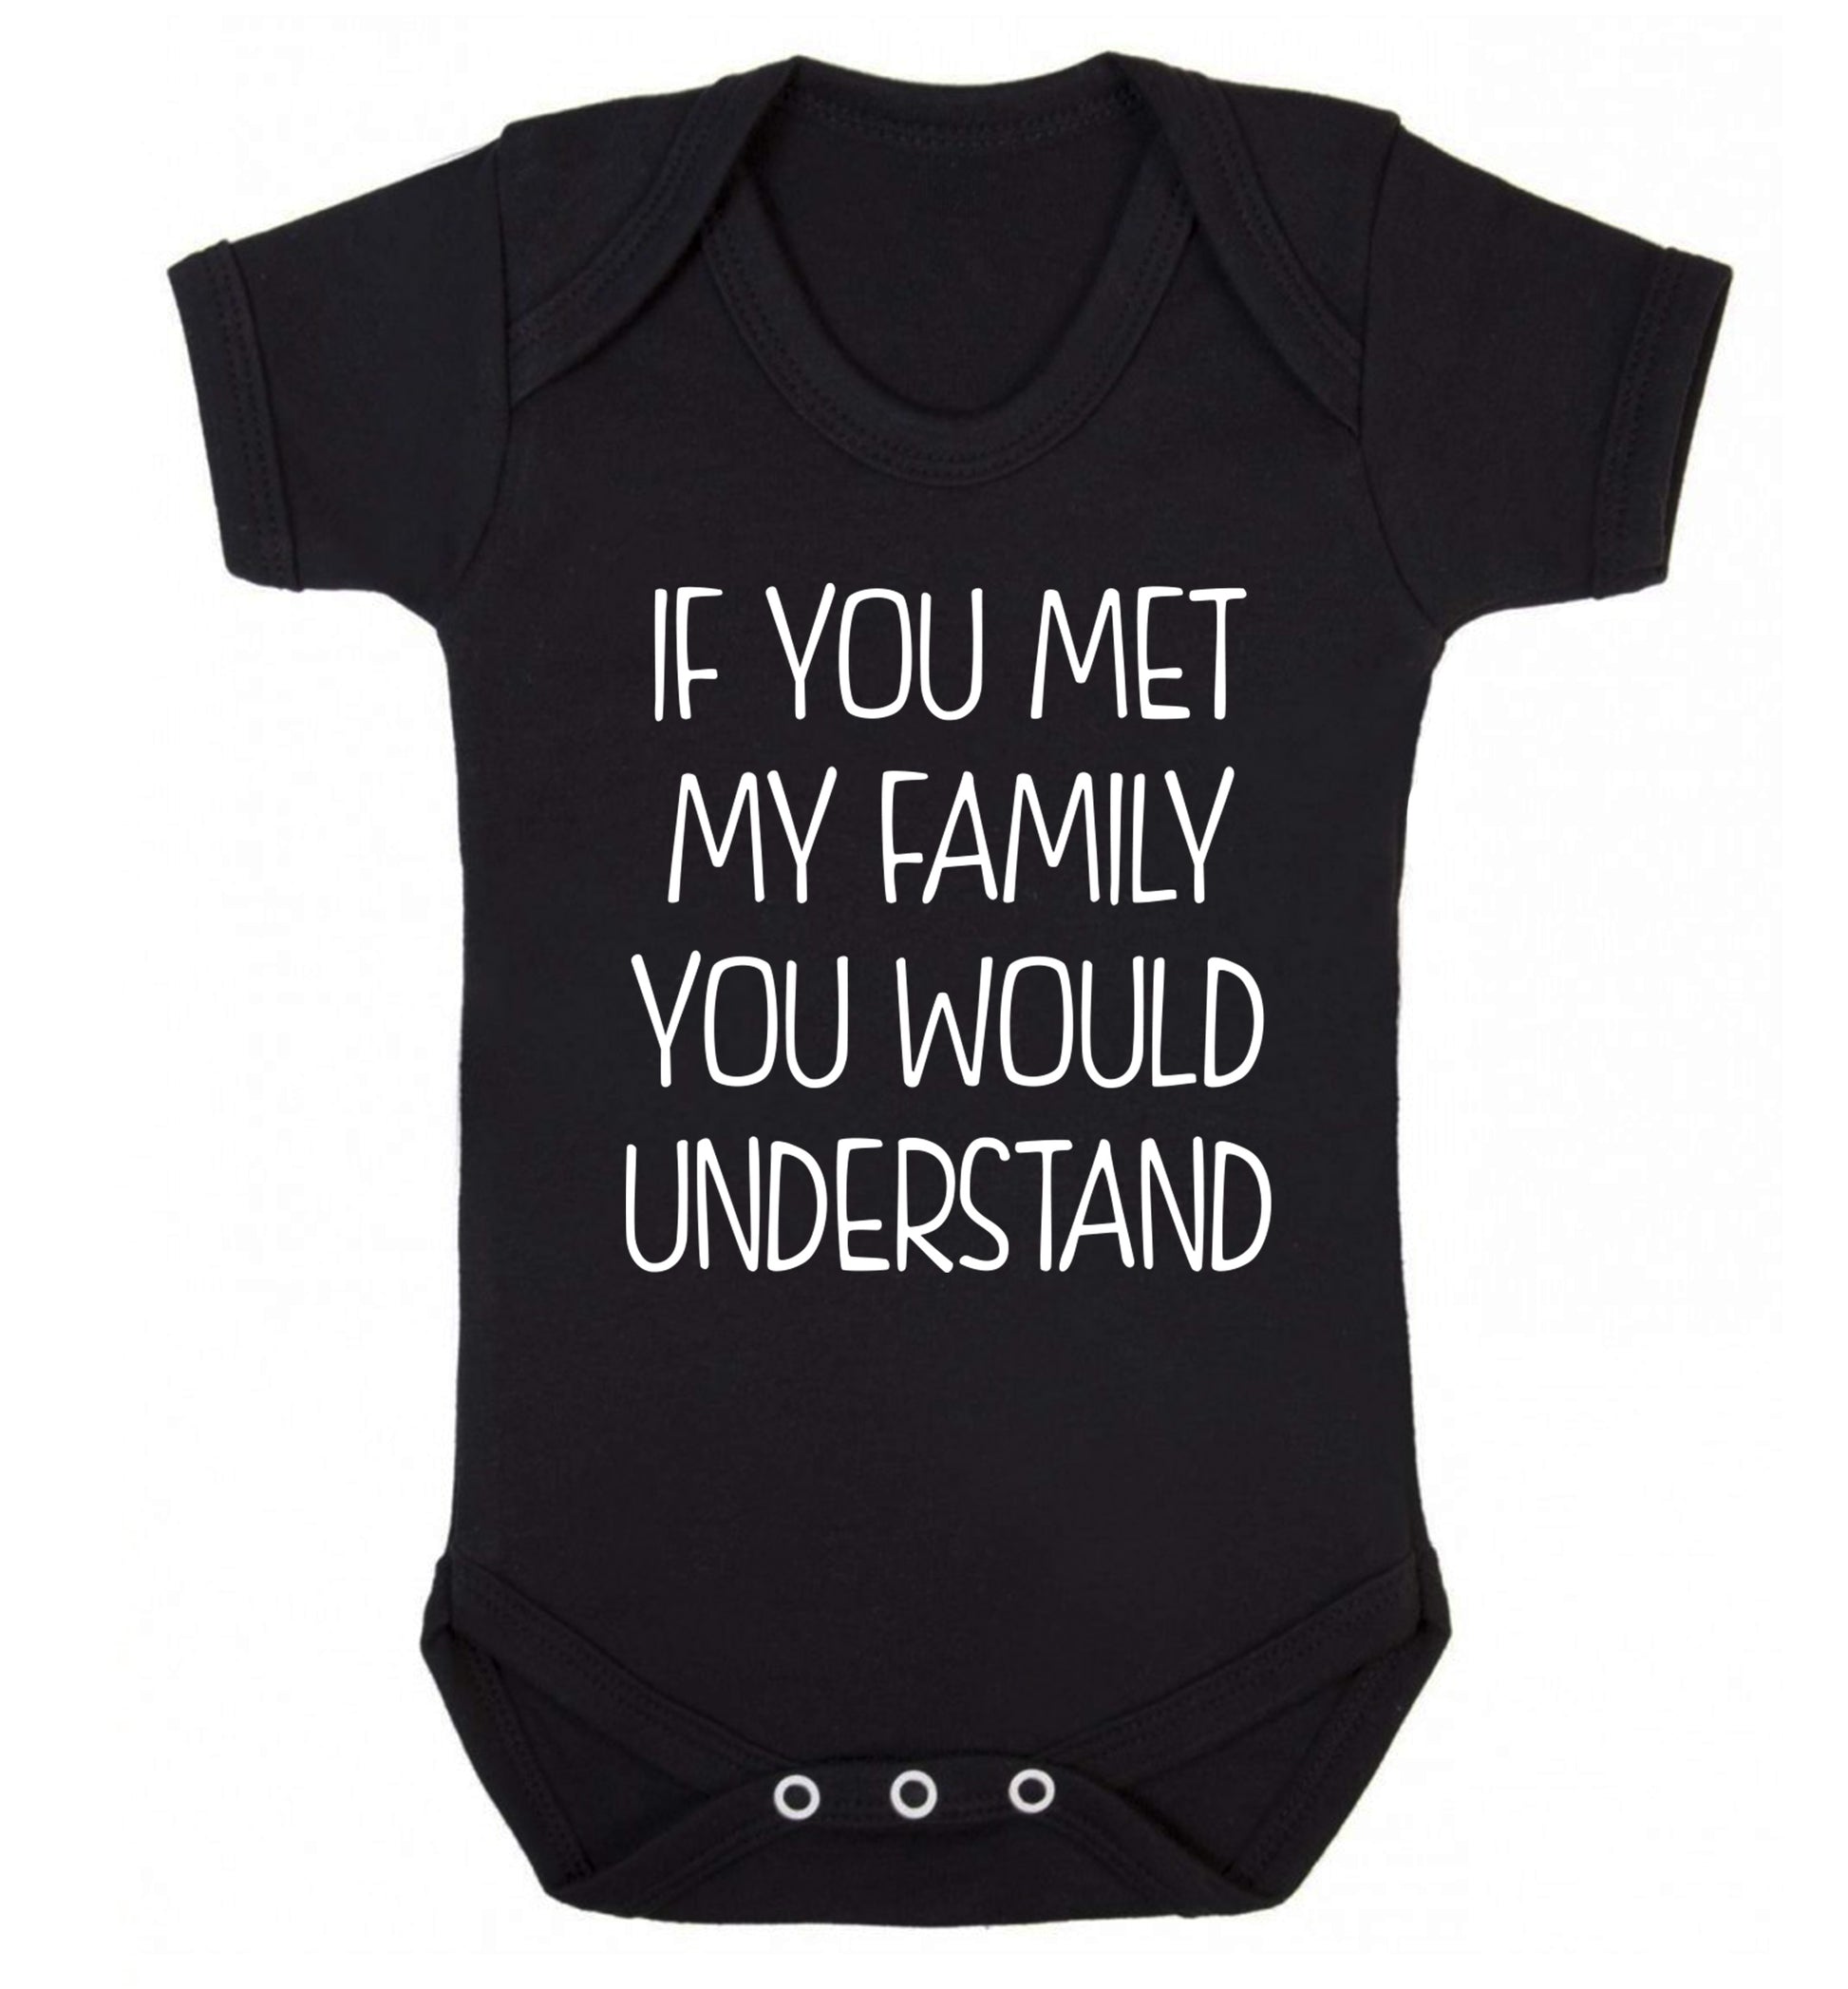 If you met my family you would understand Baby Vest black 18-24 months